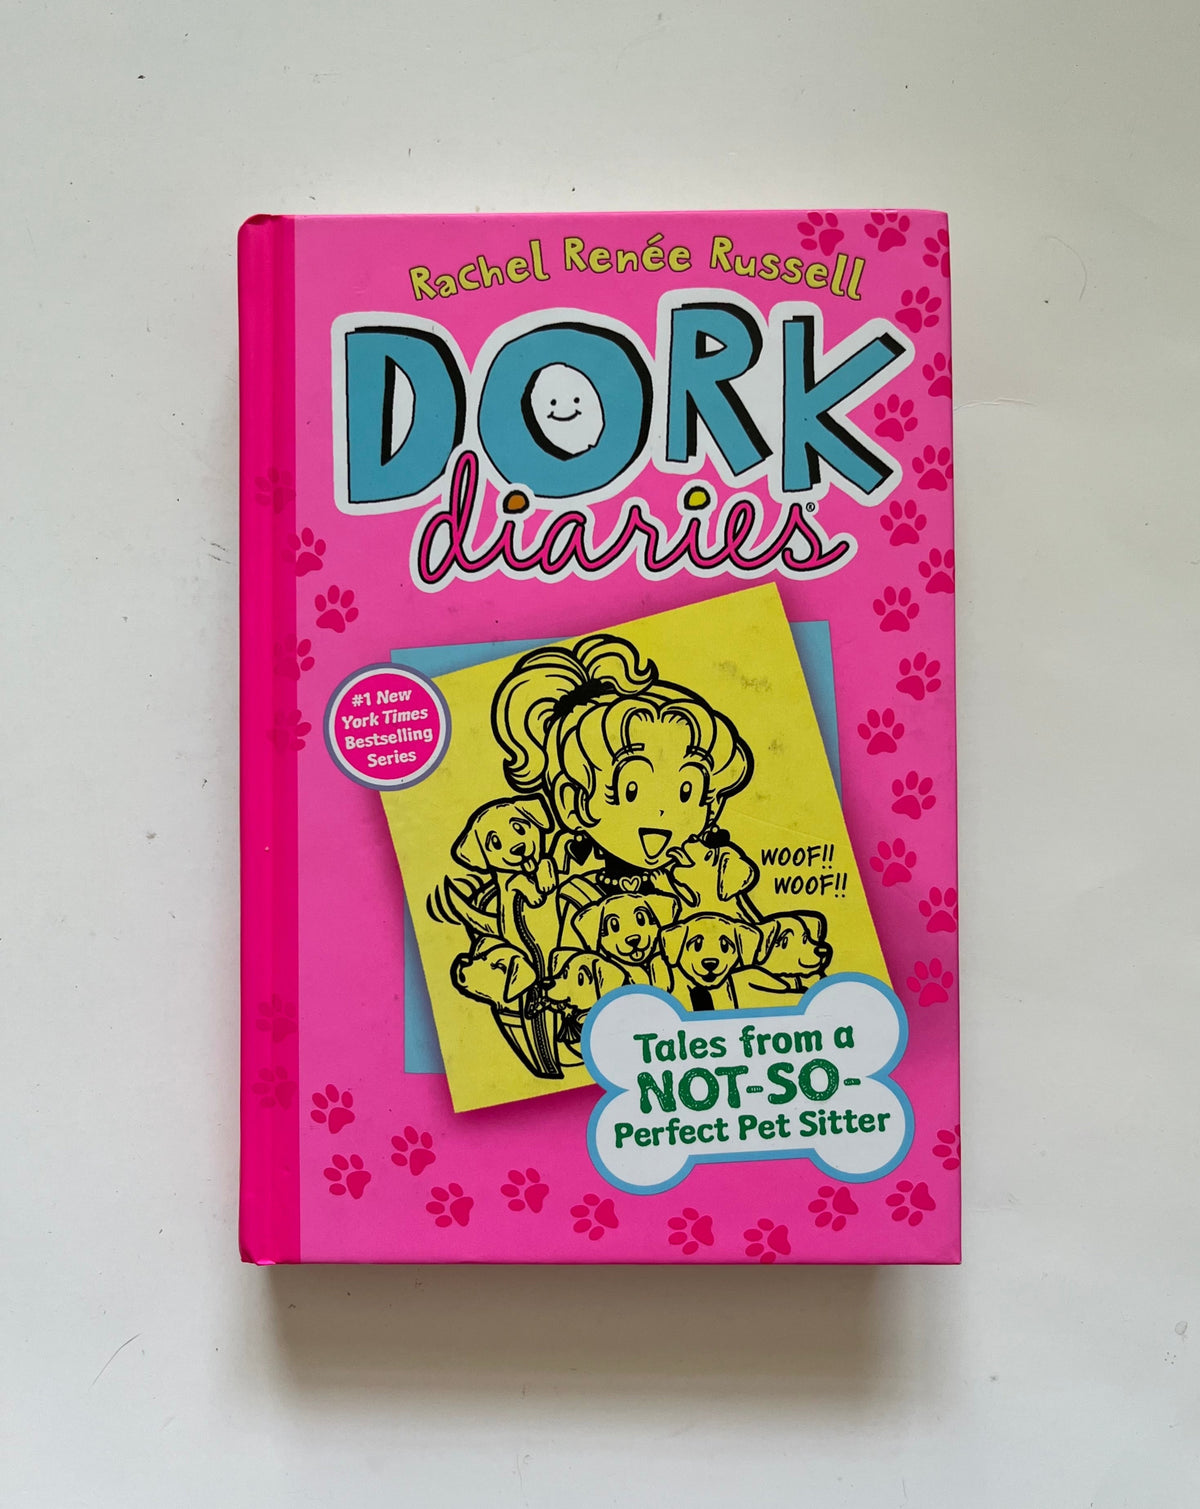 Dork Diaries: Tales from a Not-So-Perfect Pet Sitter by Rachel Renee Russell